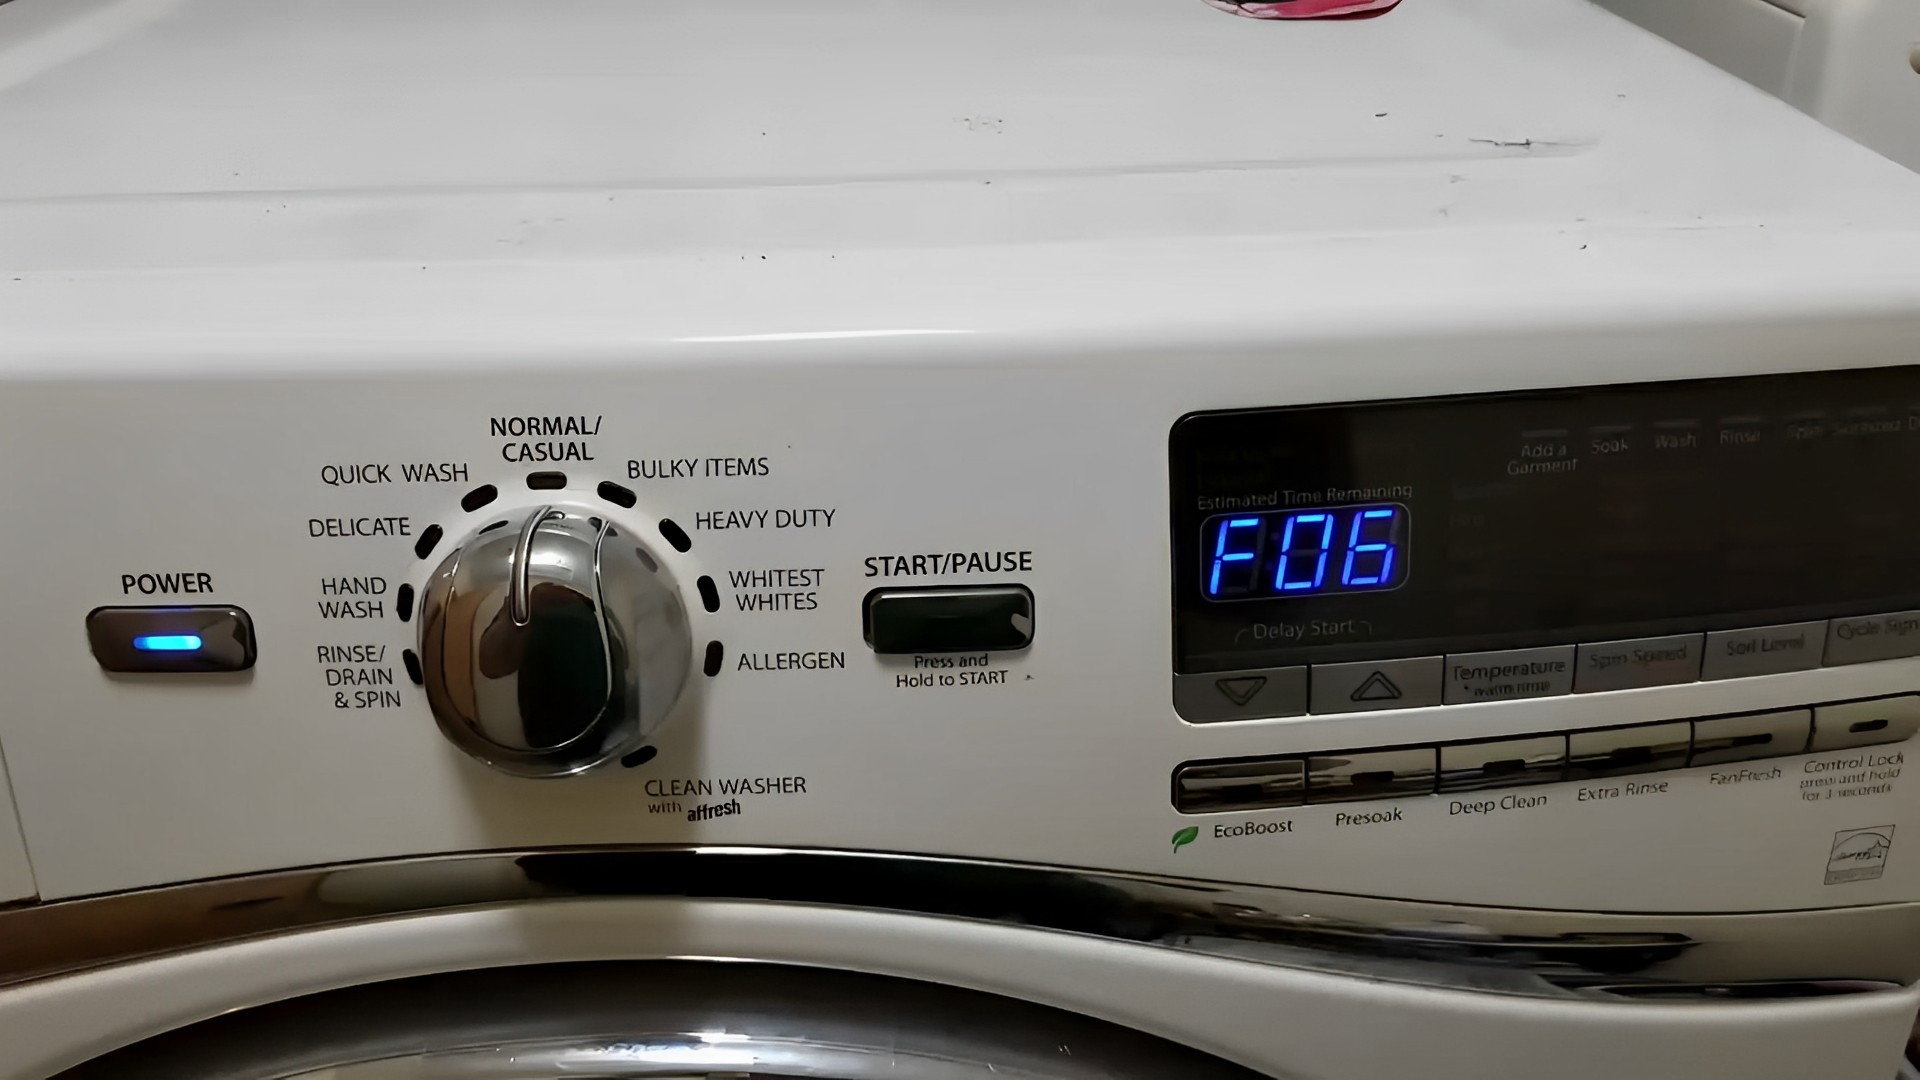 How To Fix The Error Code F6 For Whirlpool Dishwasher